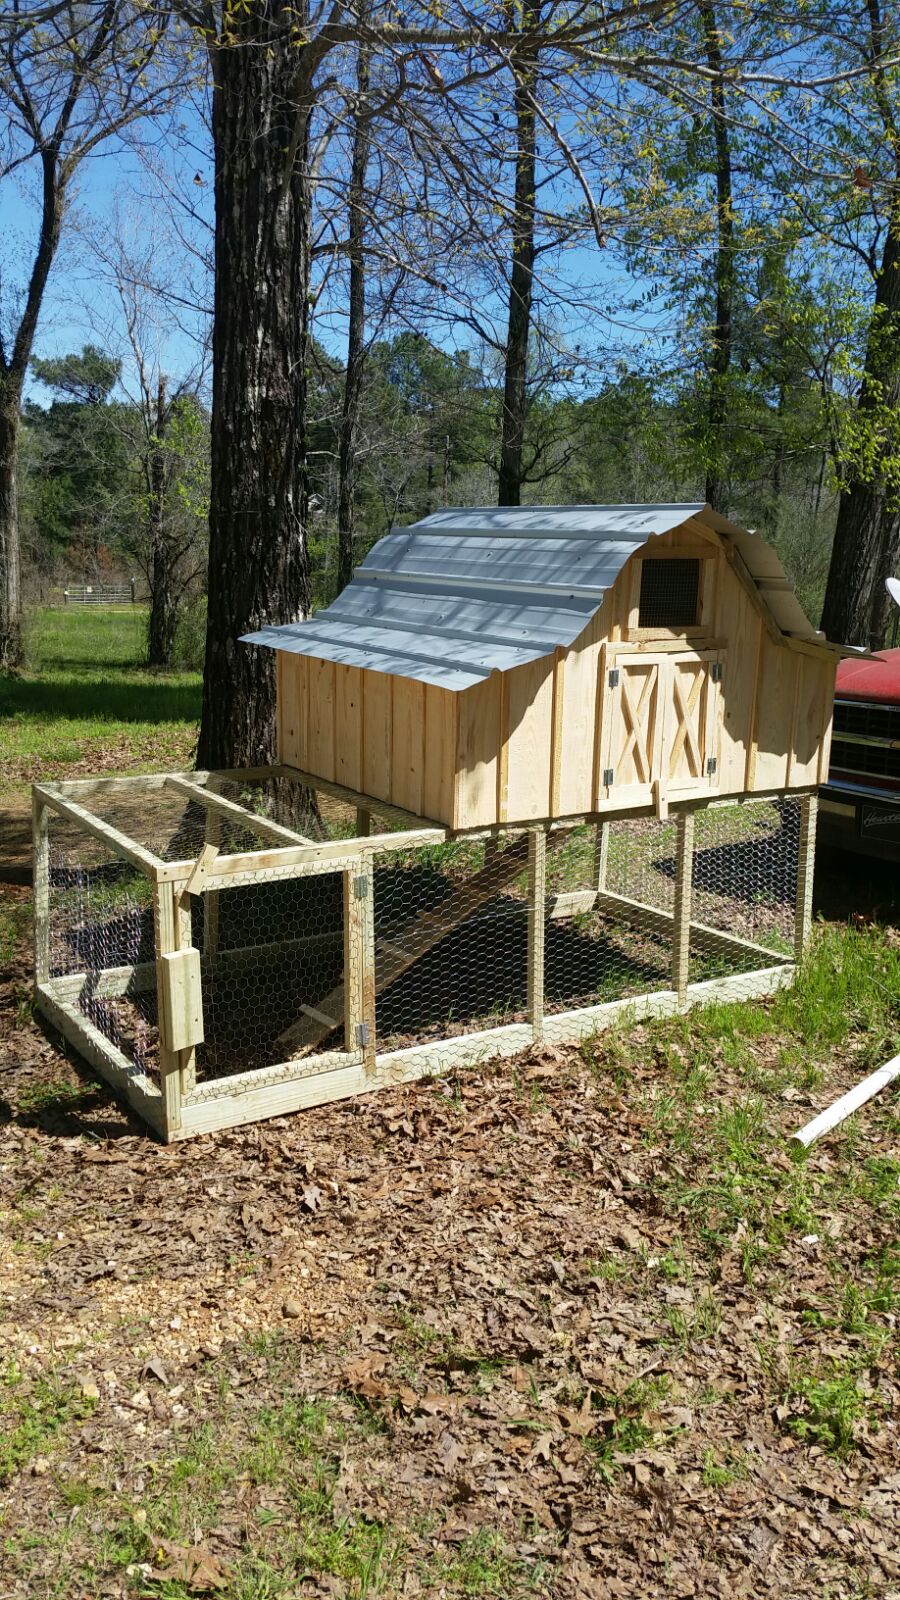 Donna's new chicken coop! A cute little roof/nesting building on top of a spacious little fenced in area.